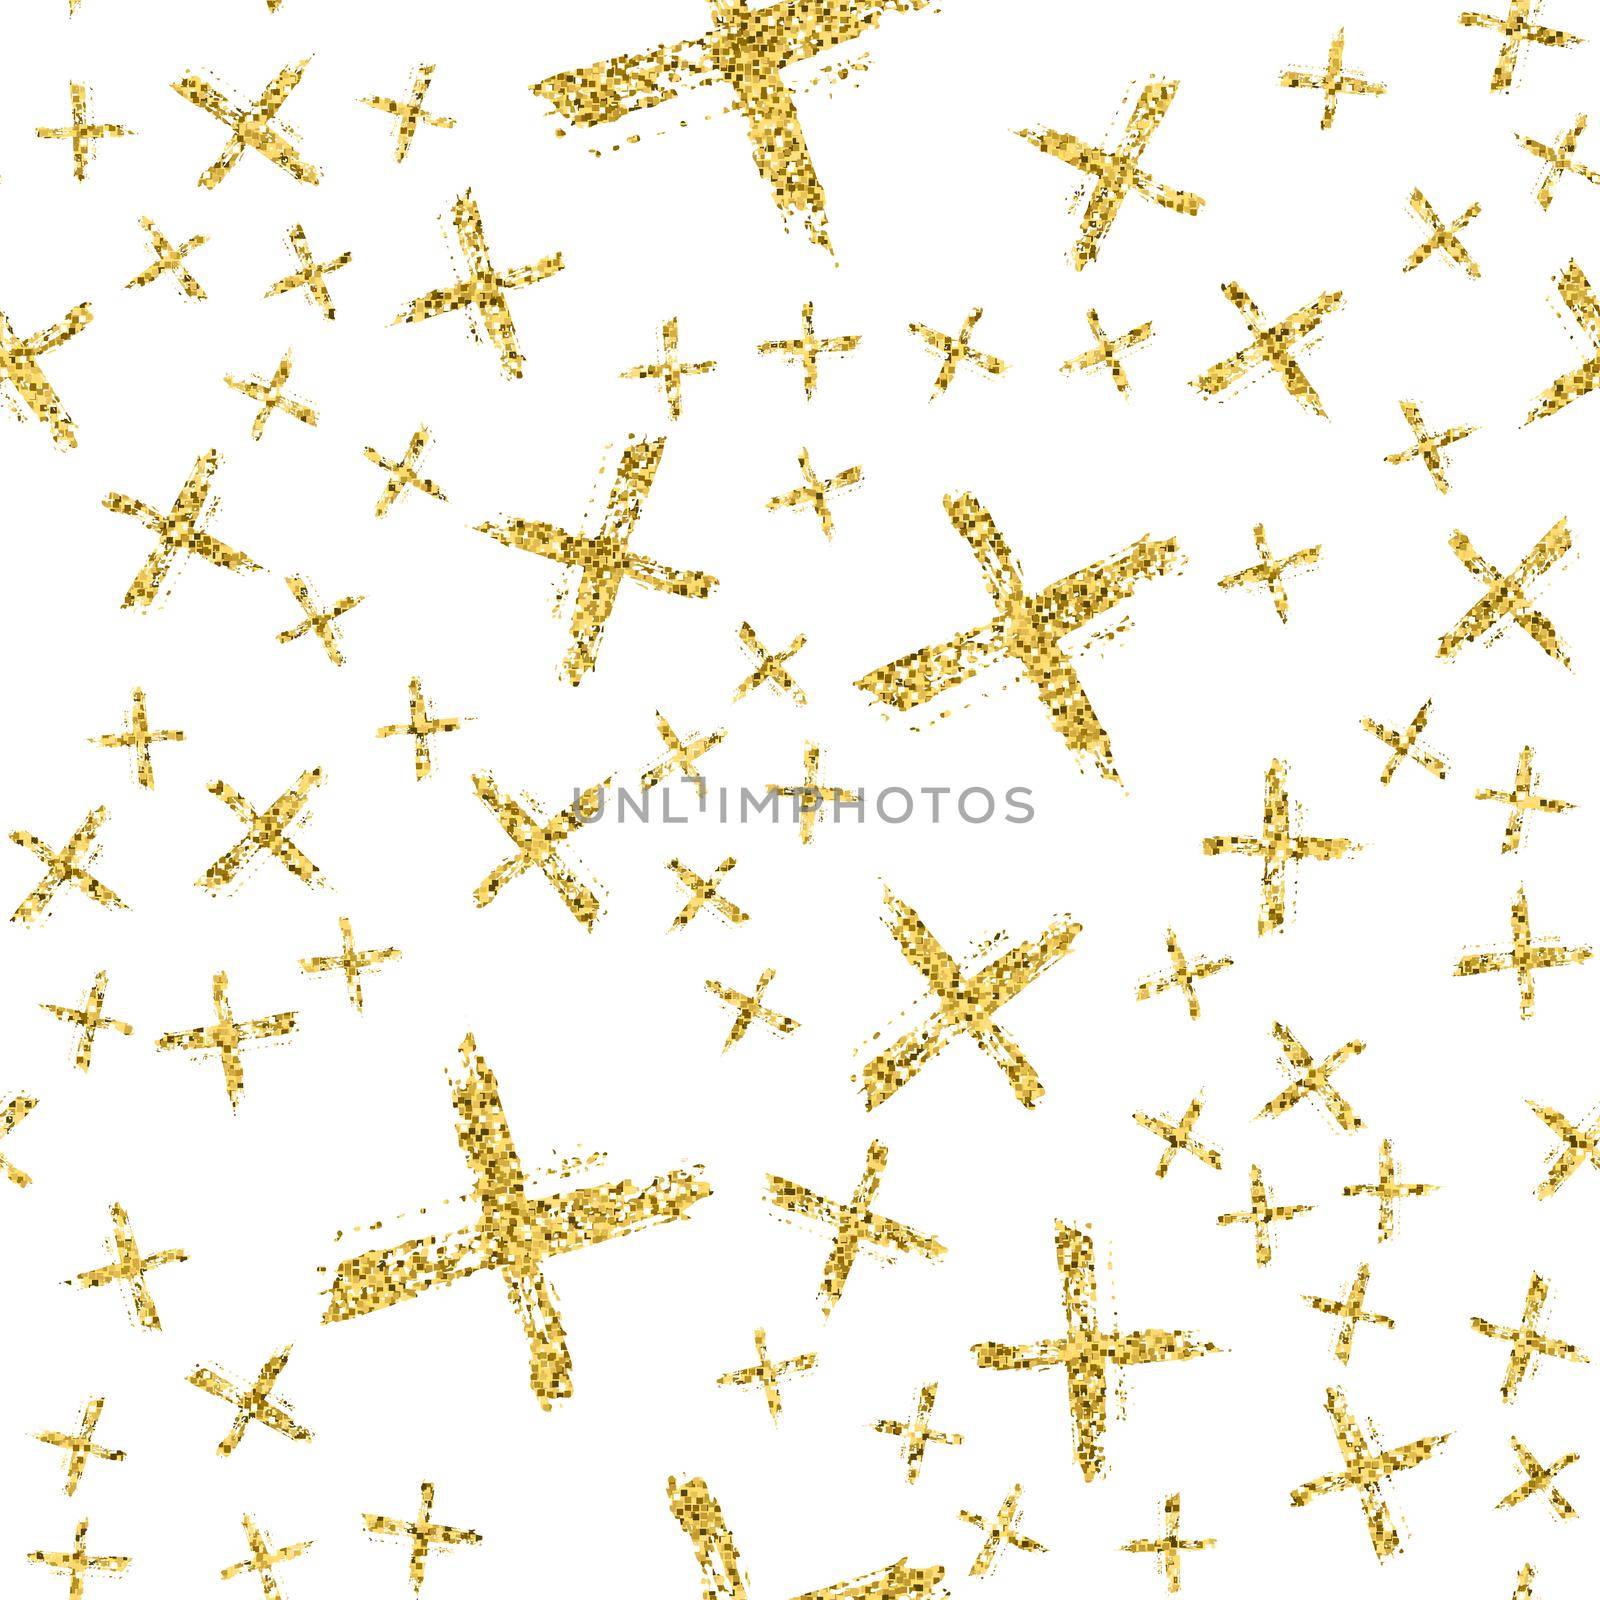 Modern seamless pattern with brush shiny cross. Gold metallic color on white background. Golden glitter texture. Ink geometric elements. Fashion catwalk style. Repeat fabric cloth print. by DesignAB